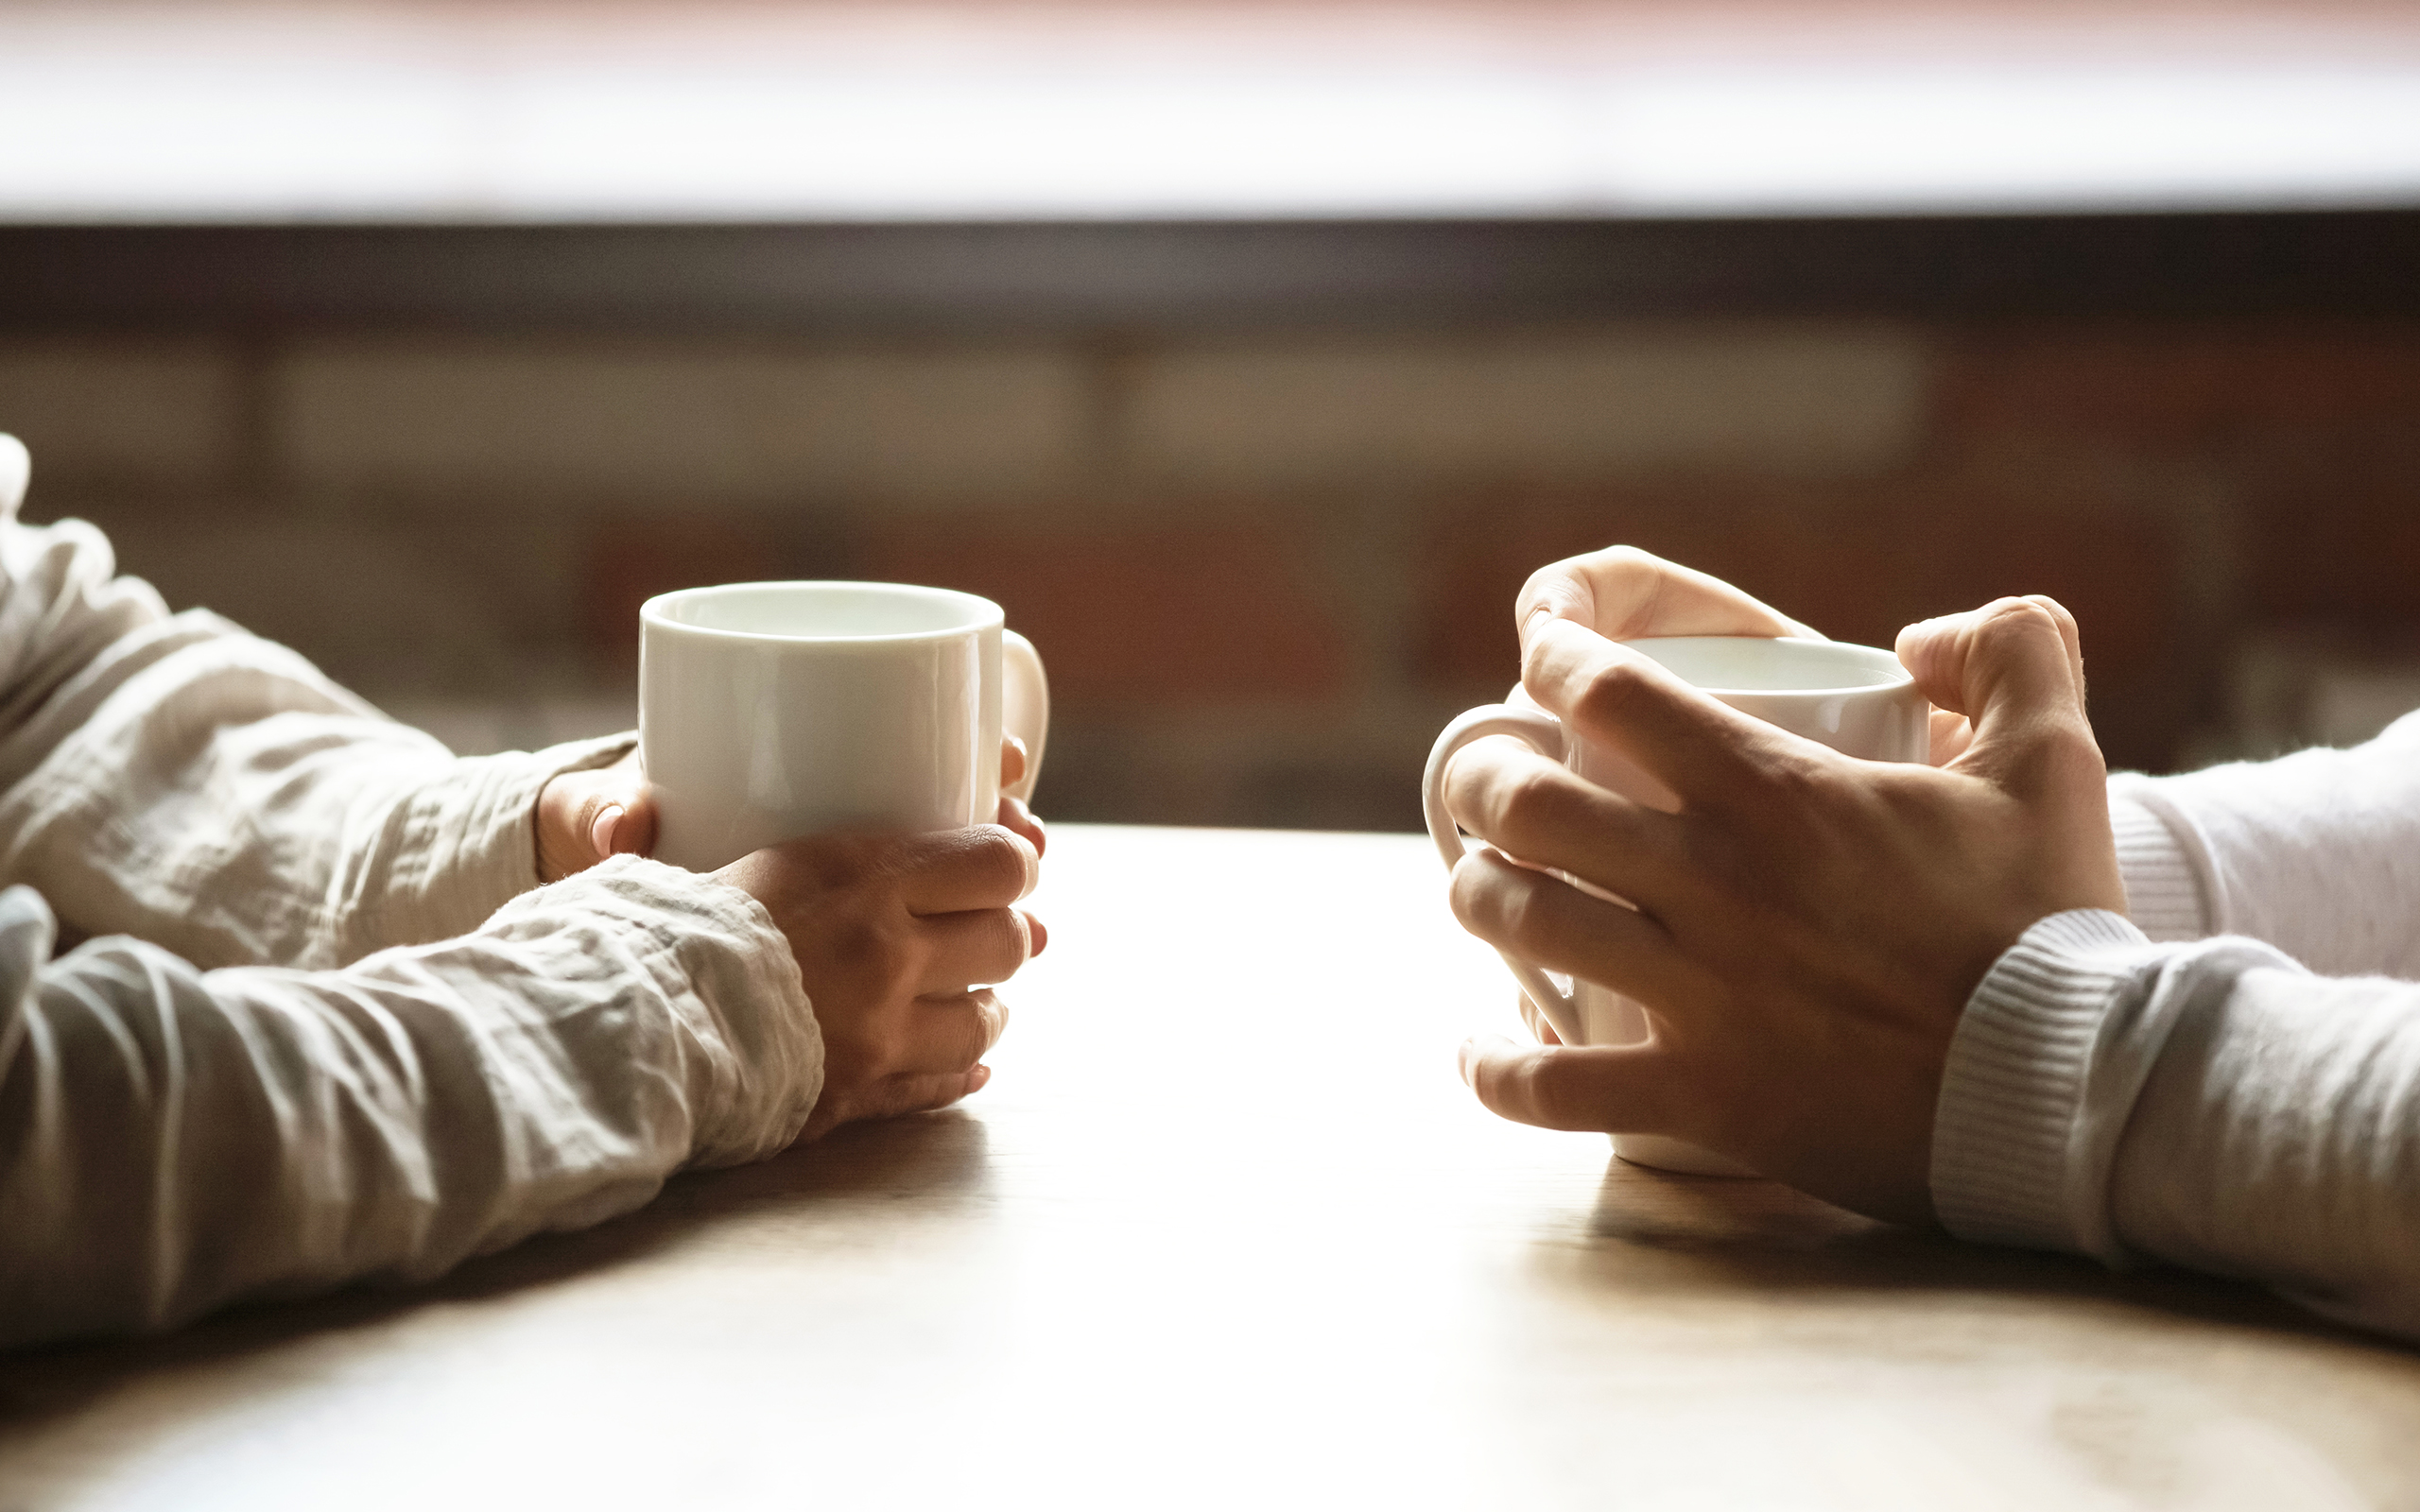 The hands of two people sitting opposite each other holding mugs